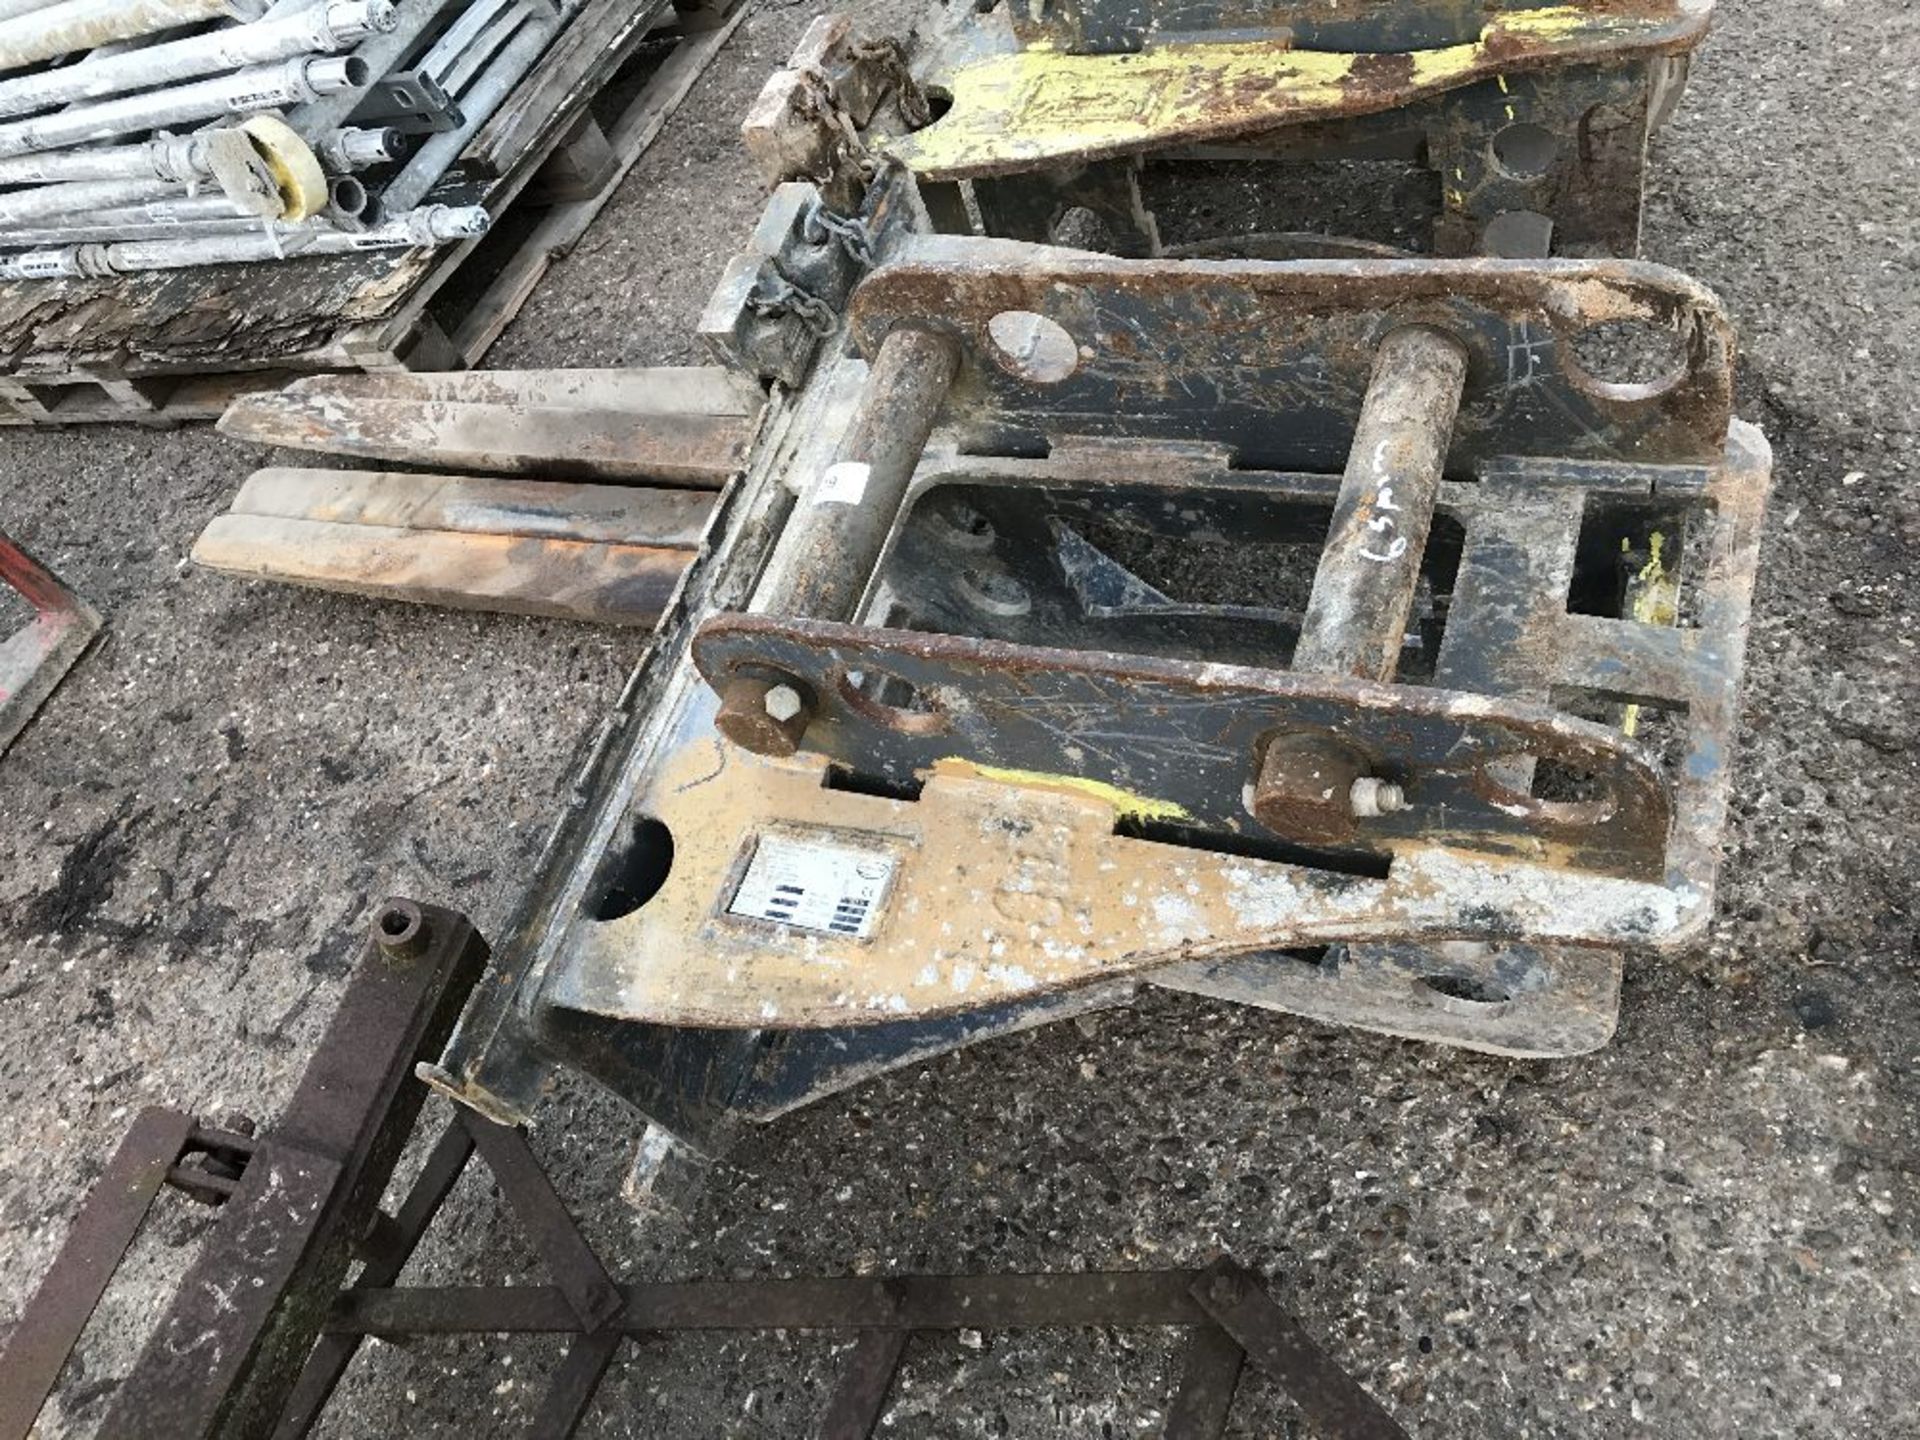 SET OF STRICKLAND EXCAVATOR MOUNTED PALLET FORKS, YEAR 2014 BUILD , 65MM PINS, PREVIOUSLY USED ON